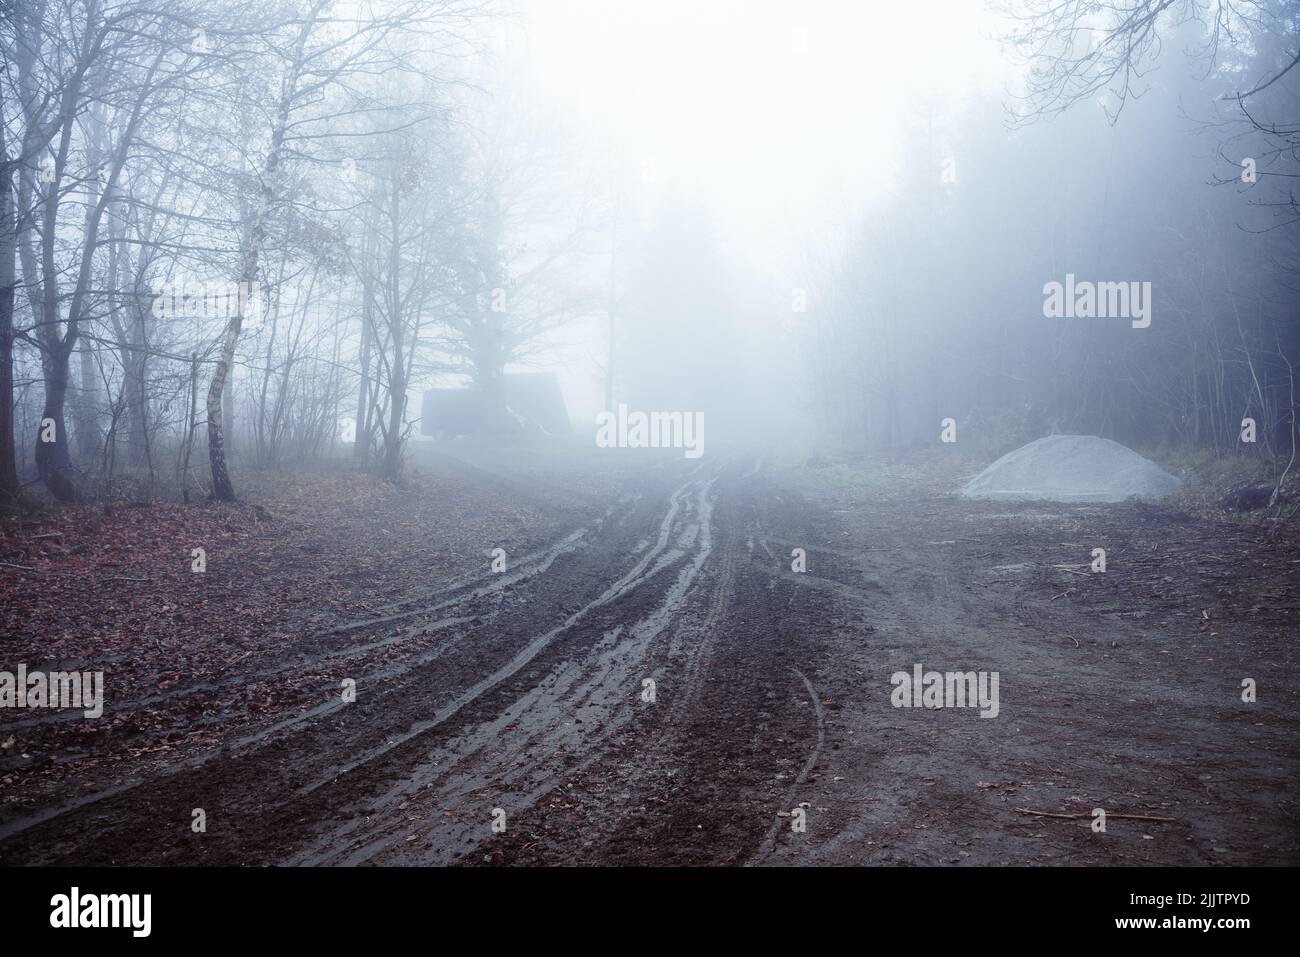 Muddy path leads through a foggy forest Stock Photo